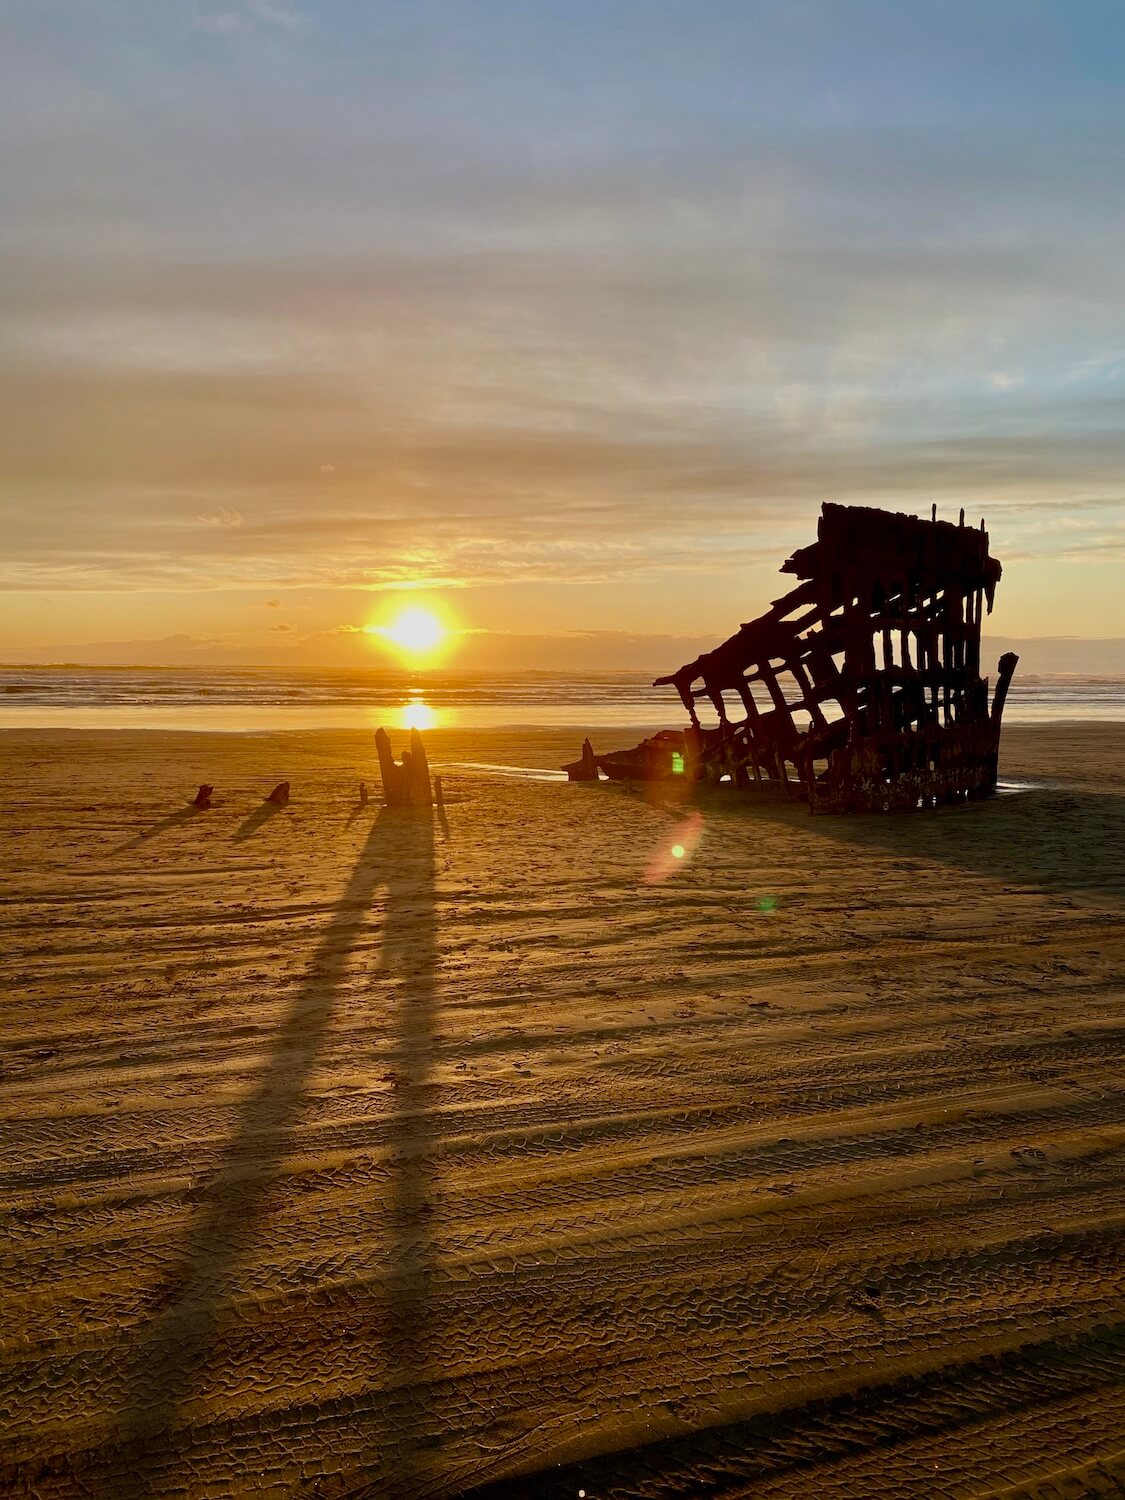 The Peter Irdale shipwreck sits wedged into the sandy beach at Fort Stevens State Park, near Astoria as the sun sets beyond the horizon of the Pacific Ocean.  The glow is yellowish as the clouds and upper sky fight to keep their blue color. 